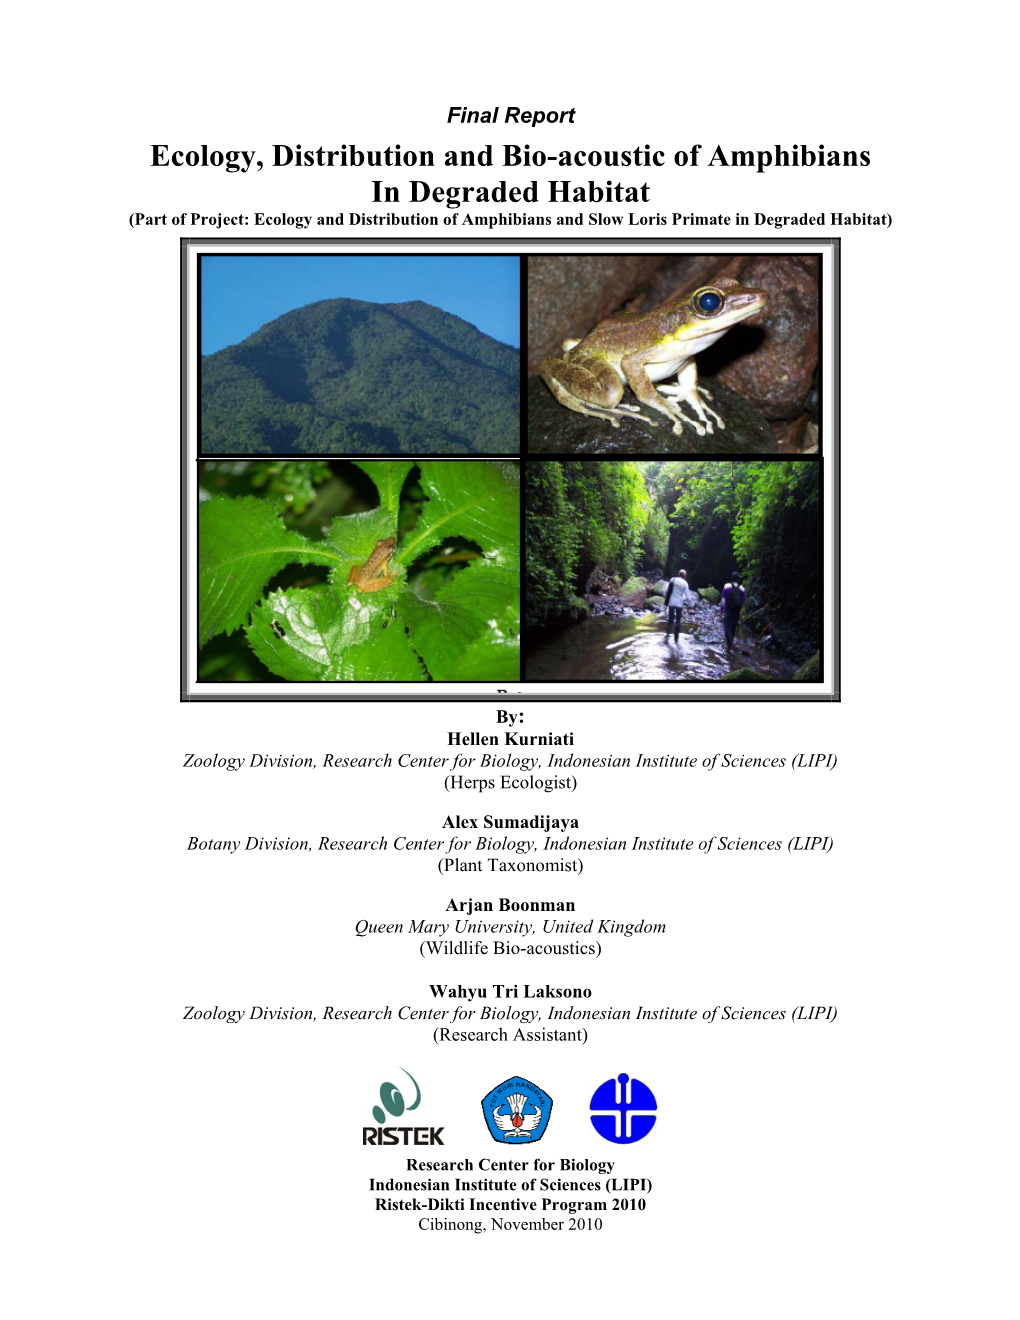 Ecology, Distribution and Bio-Acoustic of Amphibians in Degraded Habitat